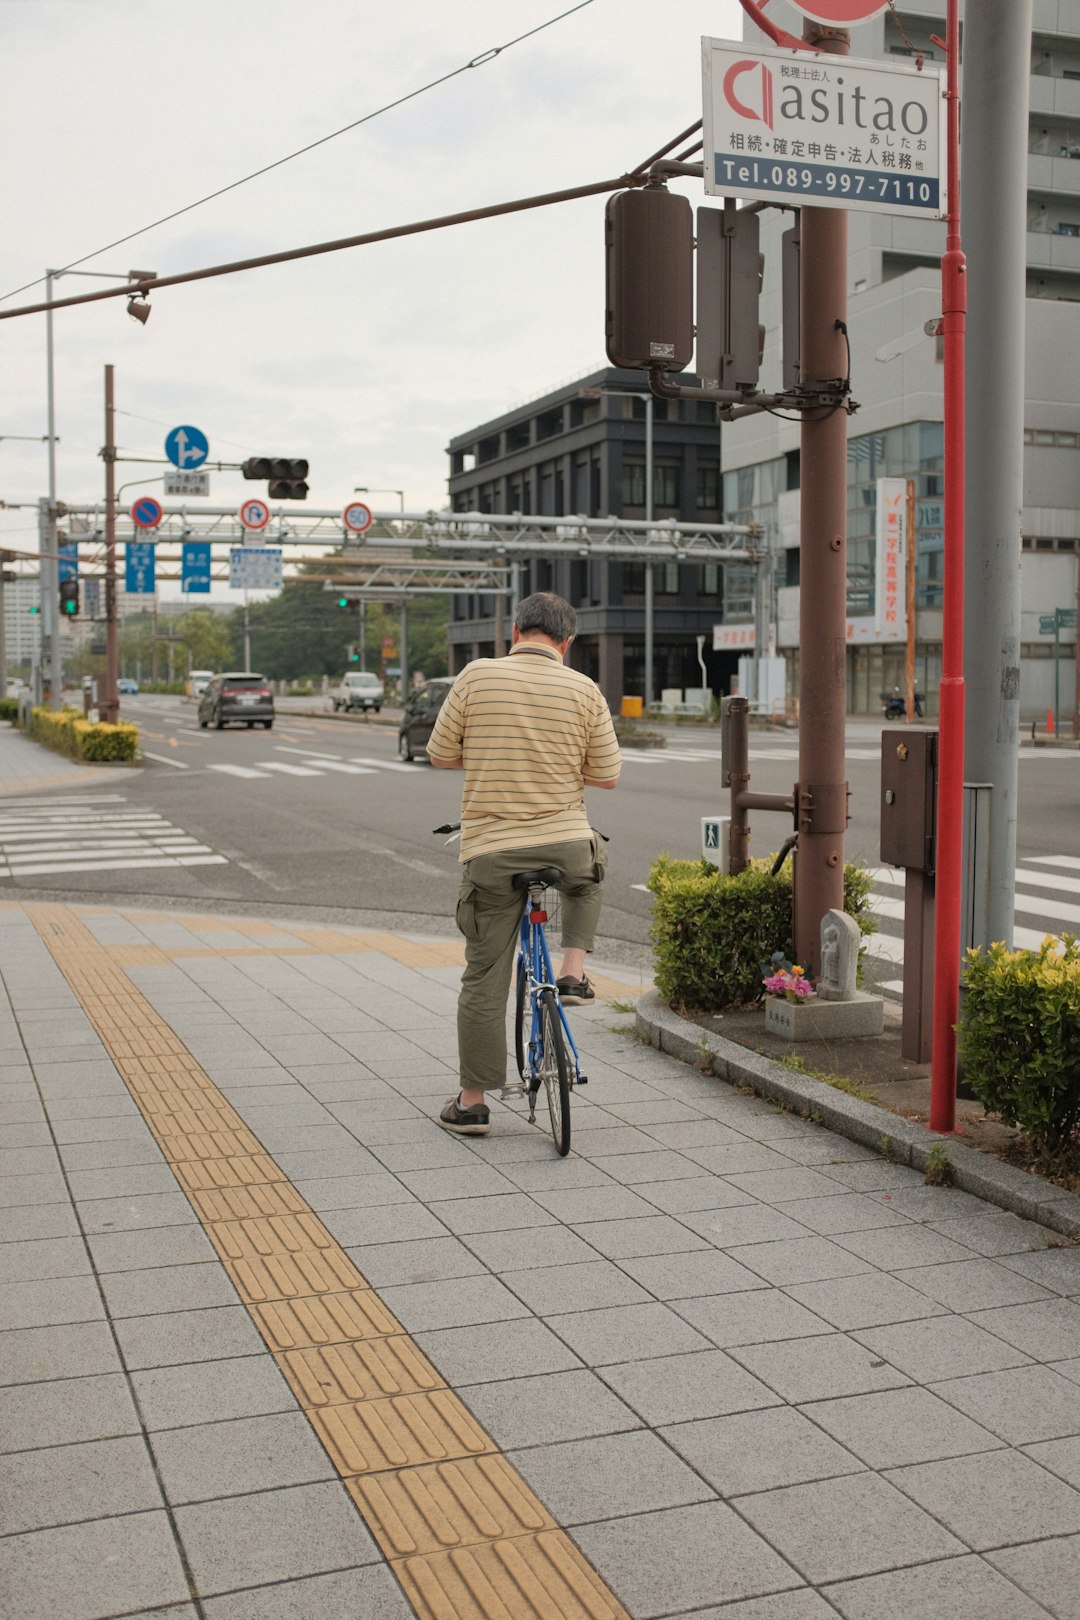 man in yellow jacket riding bicycle on road during daytime